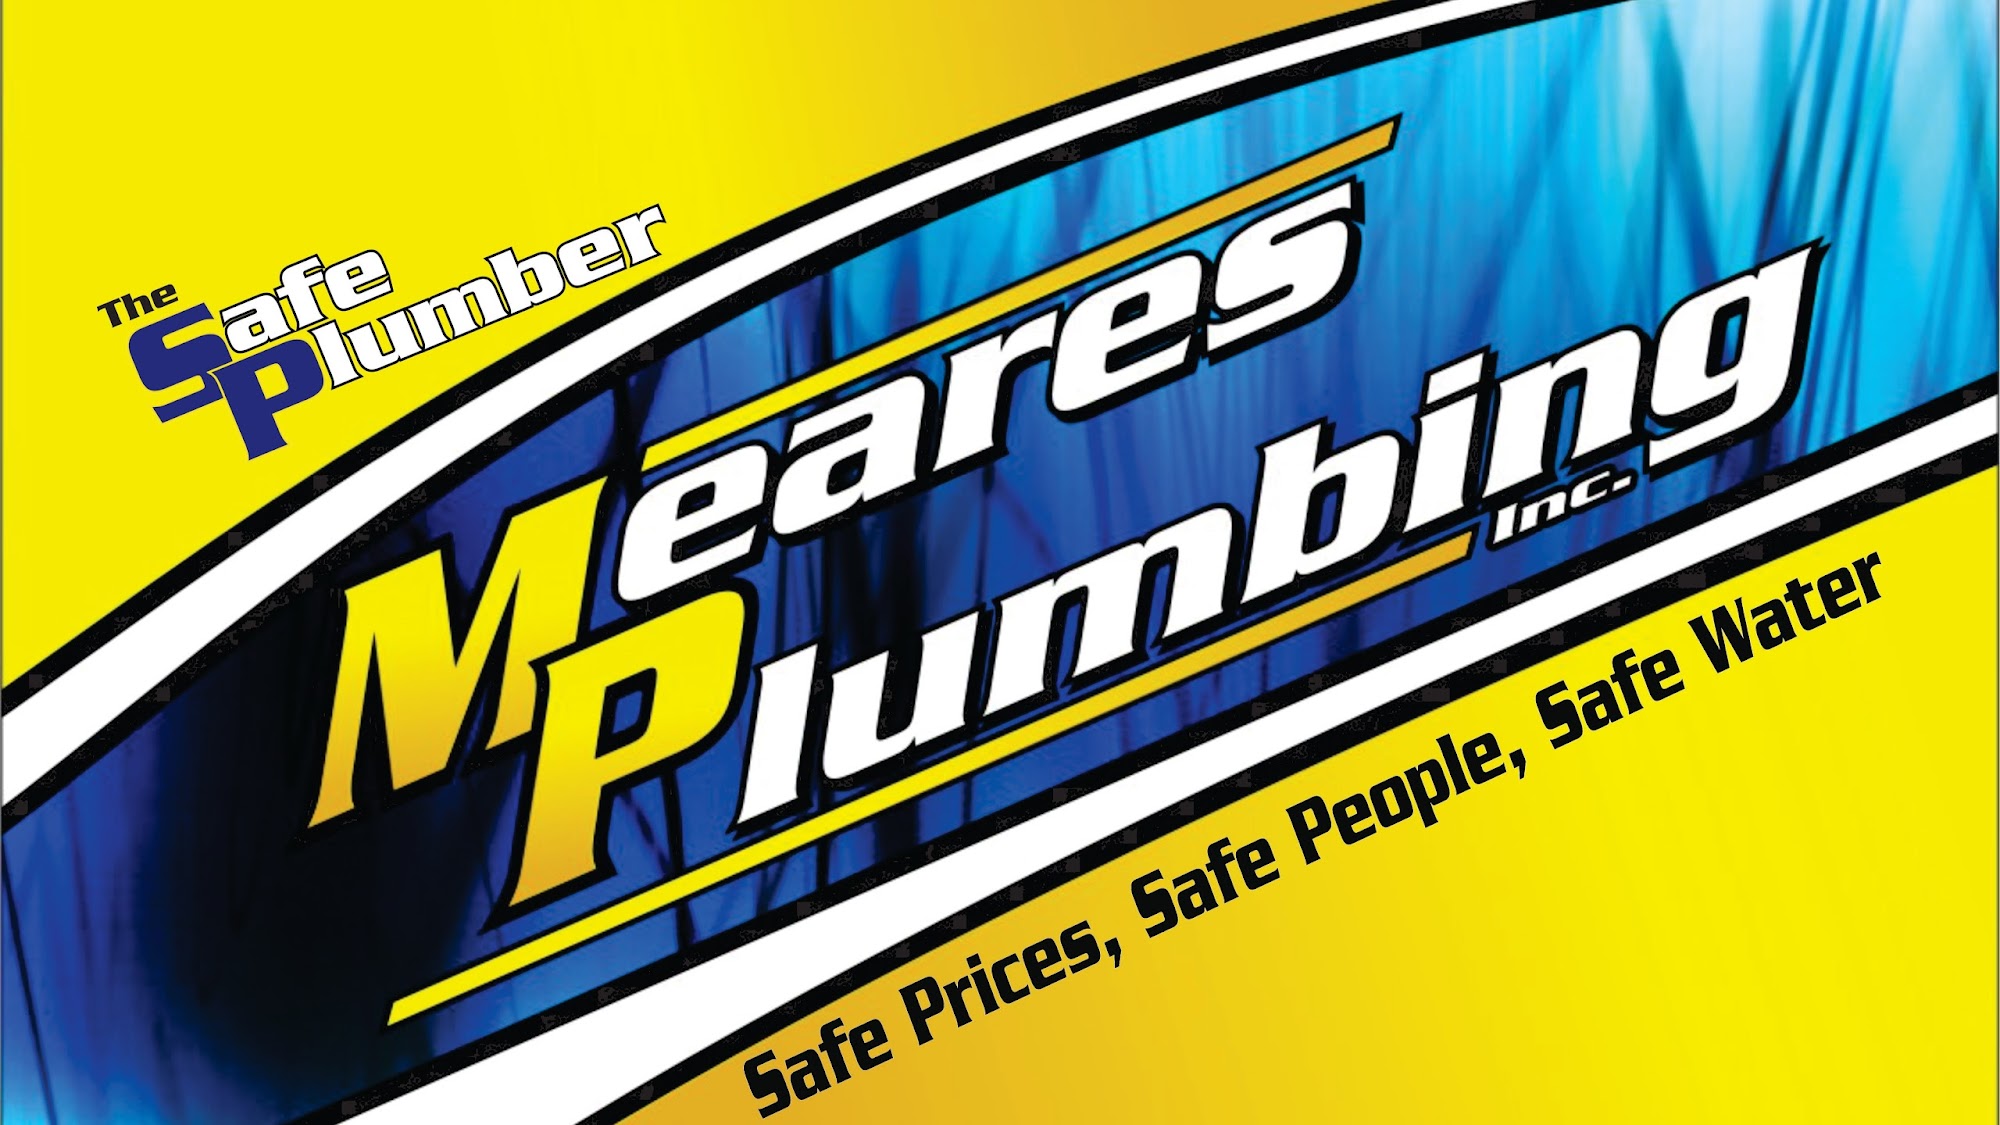 Meares Plumbing and Electrical